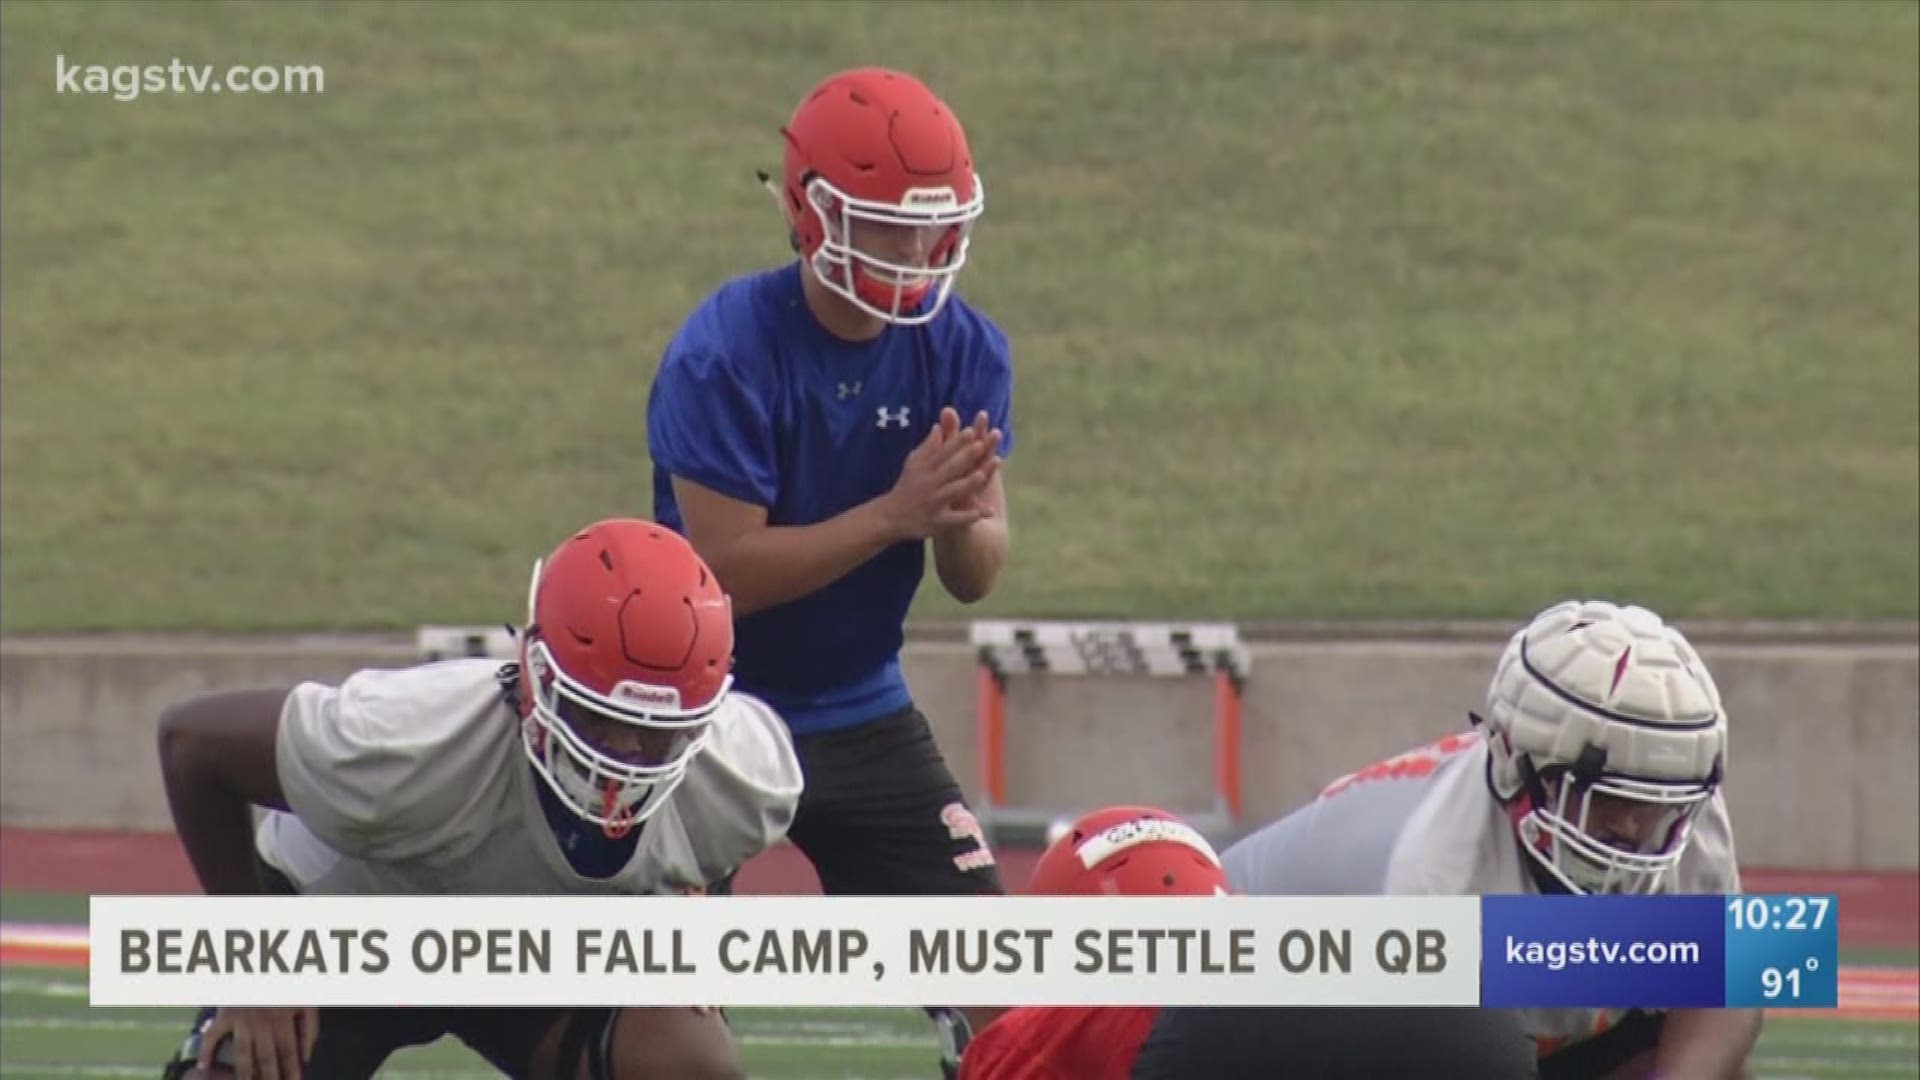 The Sam Houston State football team held its first practice on fall camp on Friday morning.